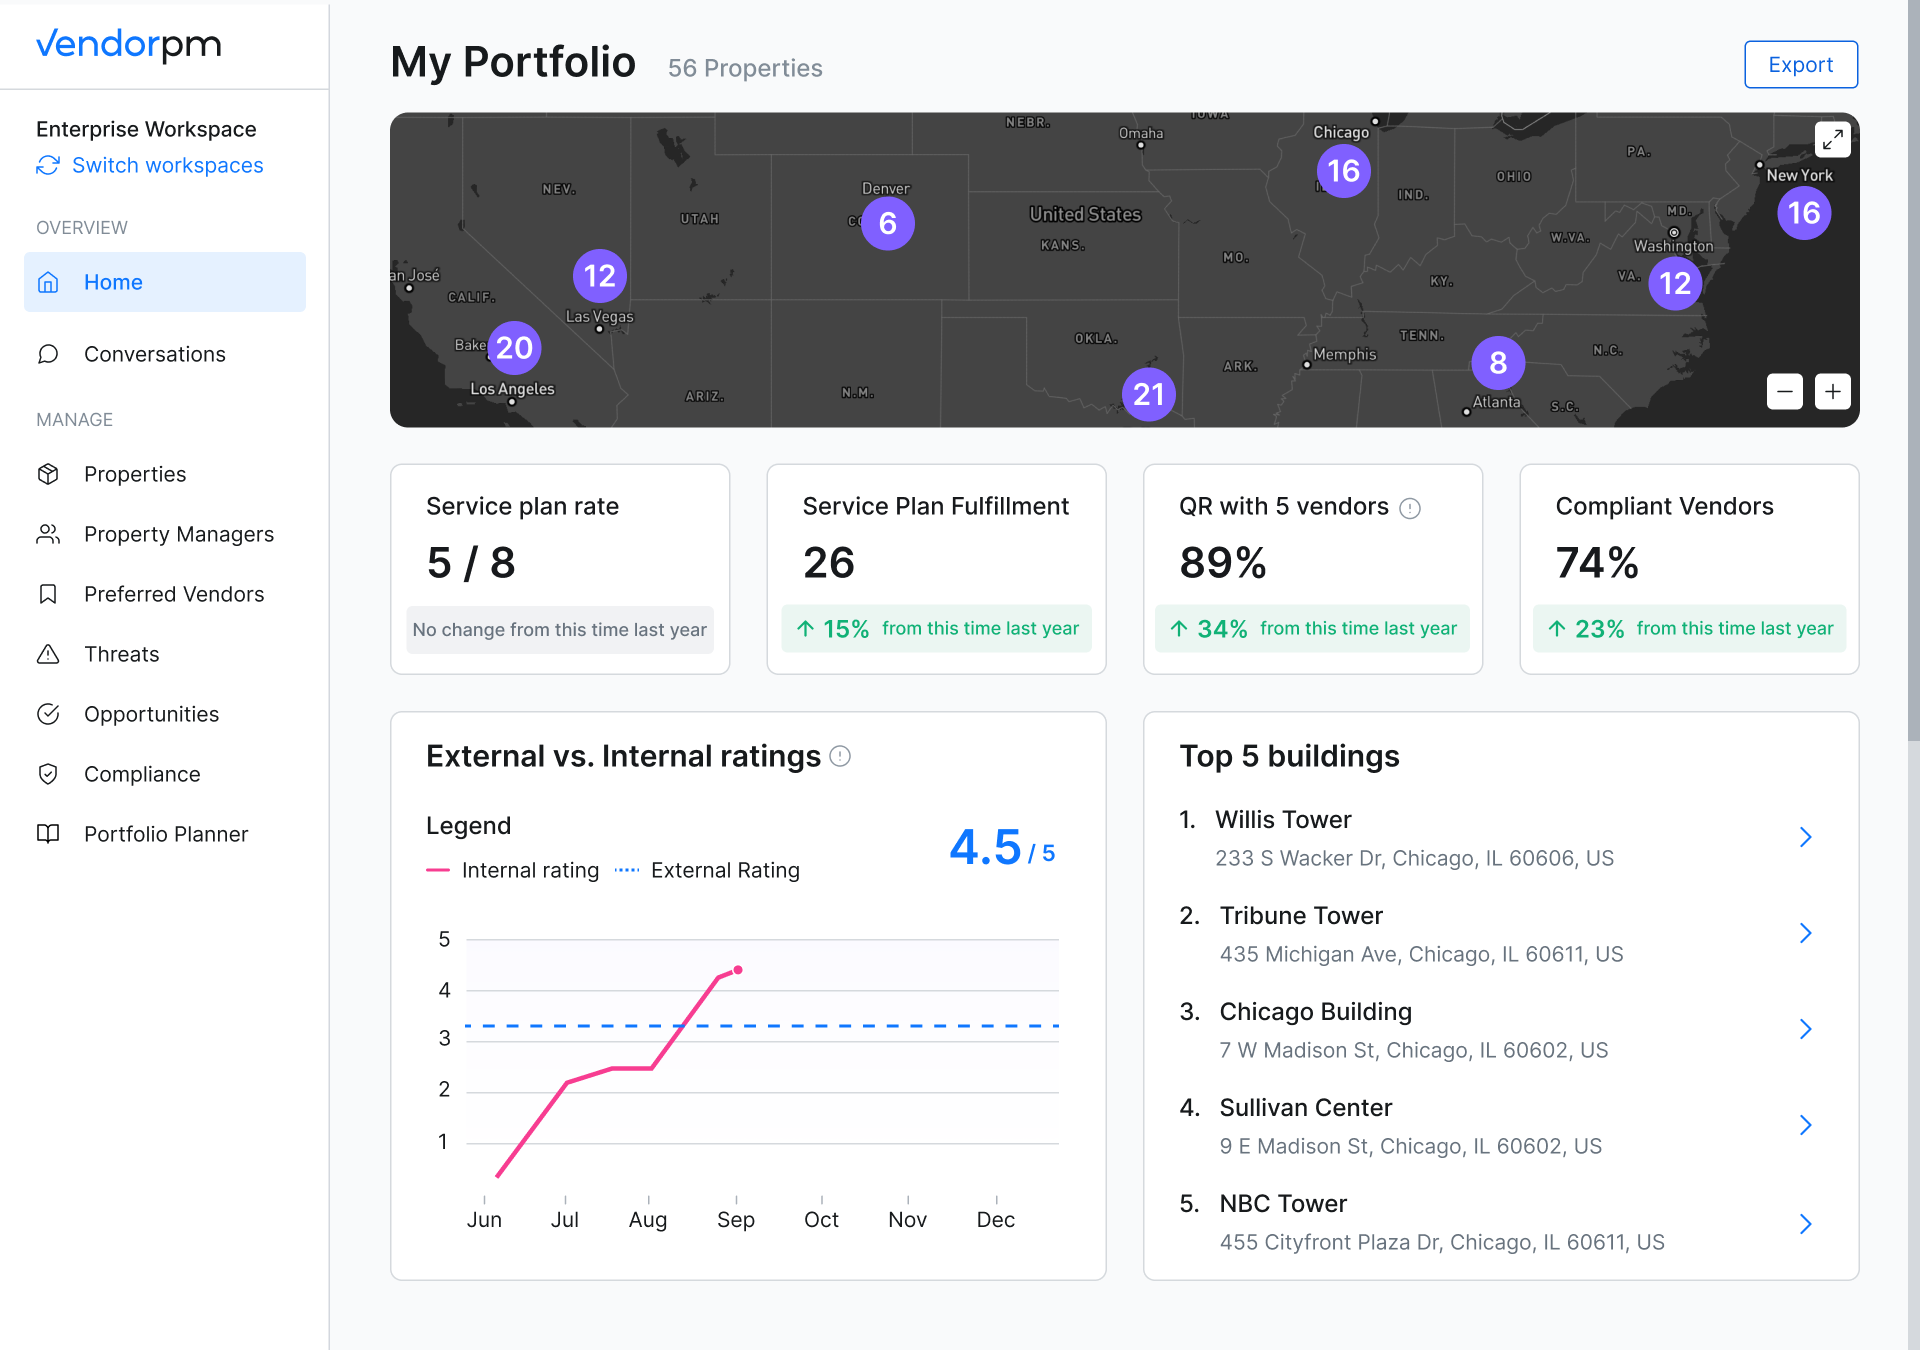 VendorPM raises $6M to scale its marketplace for property managers and service vendors